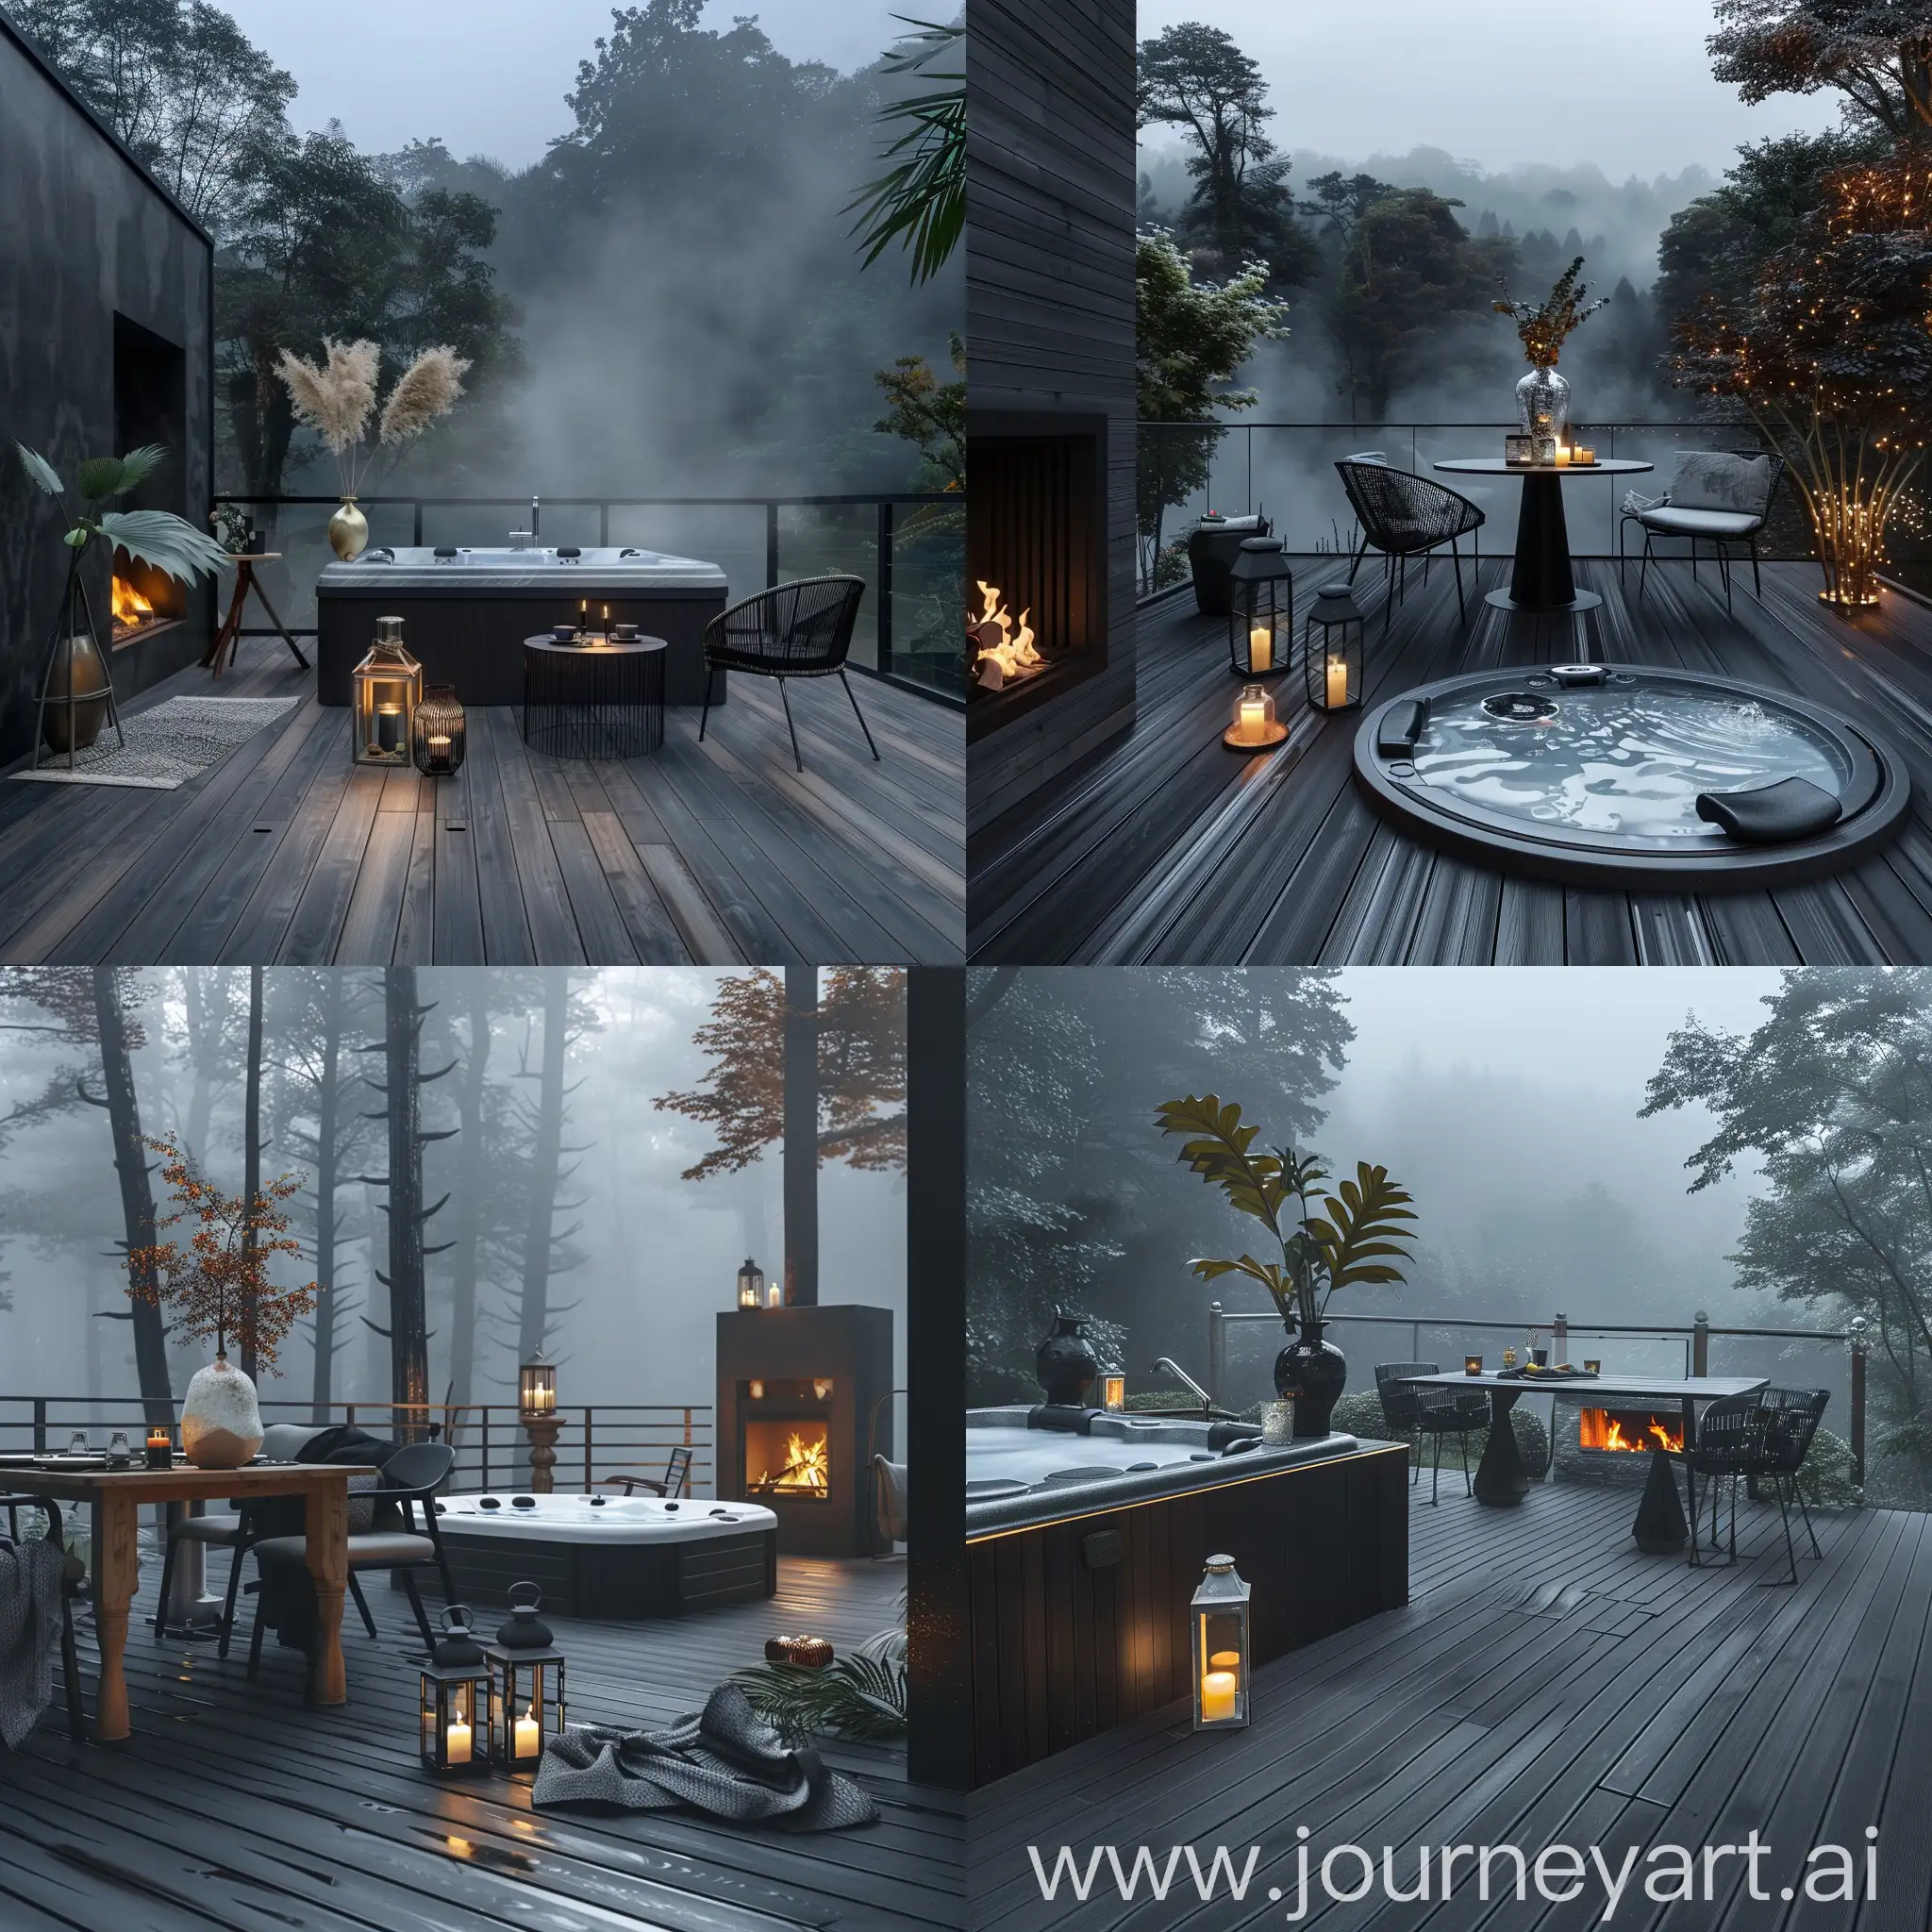 Misty-Tropical-Forest-Terrace-Retreat-with-Jacuzzi-and-Fireplace